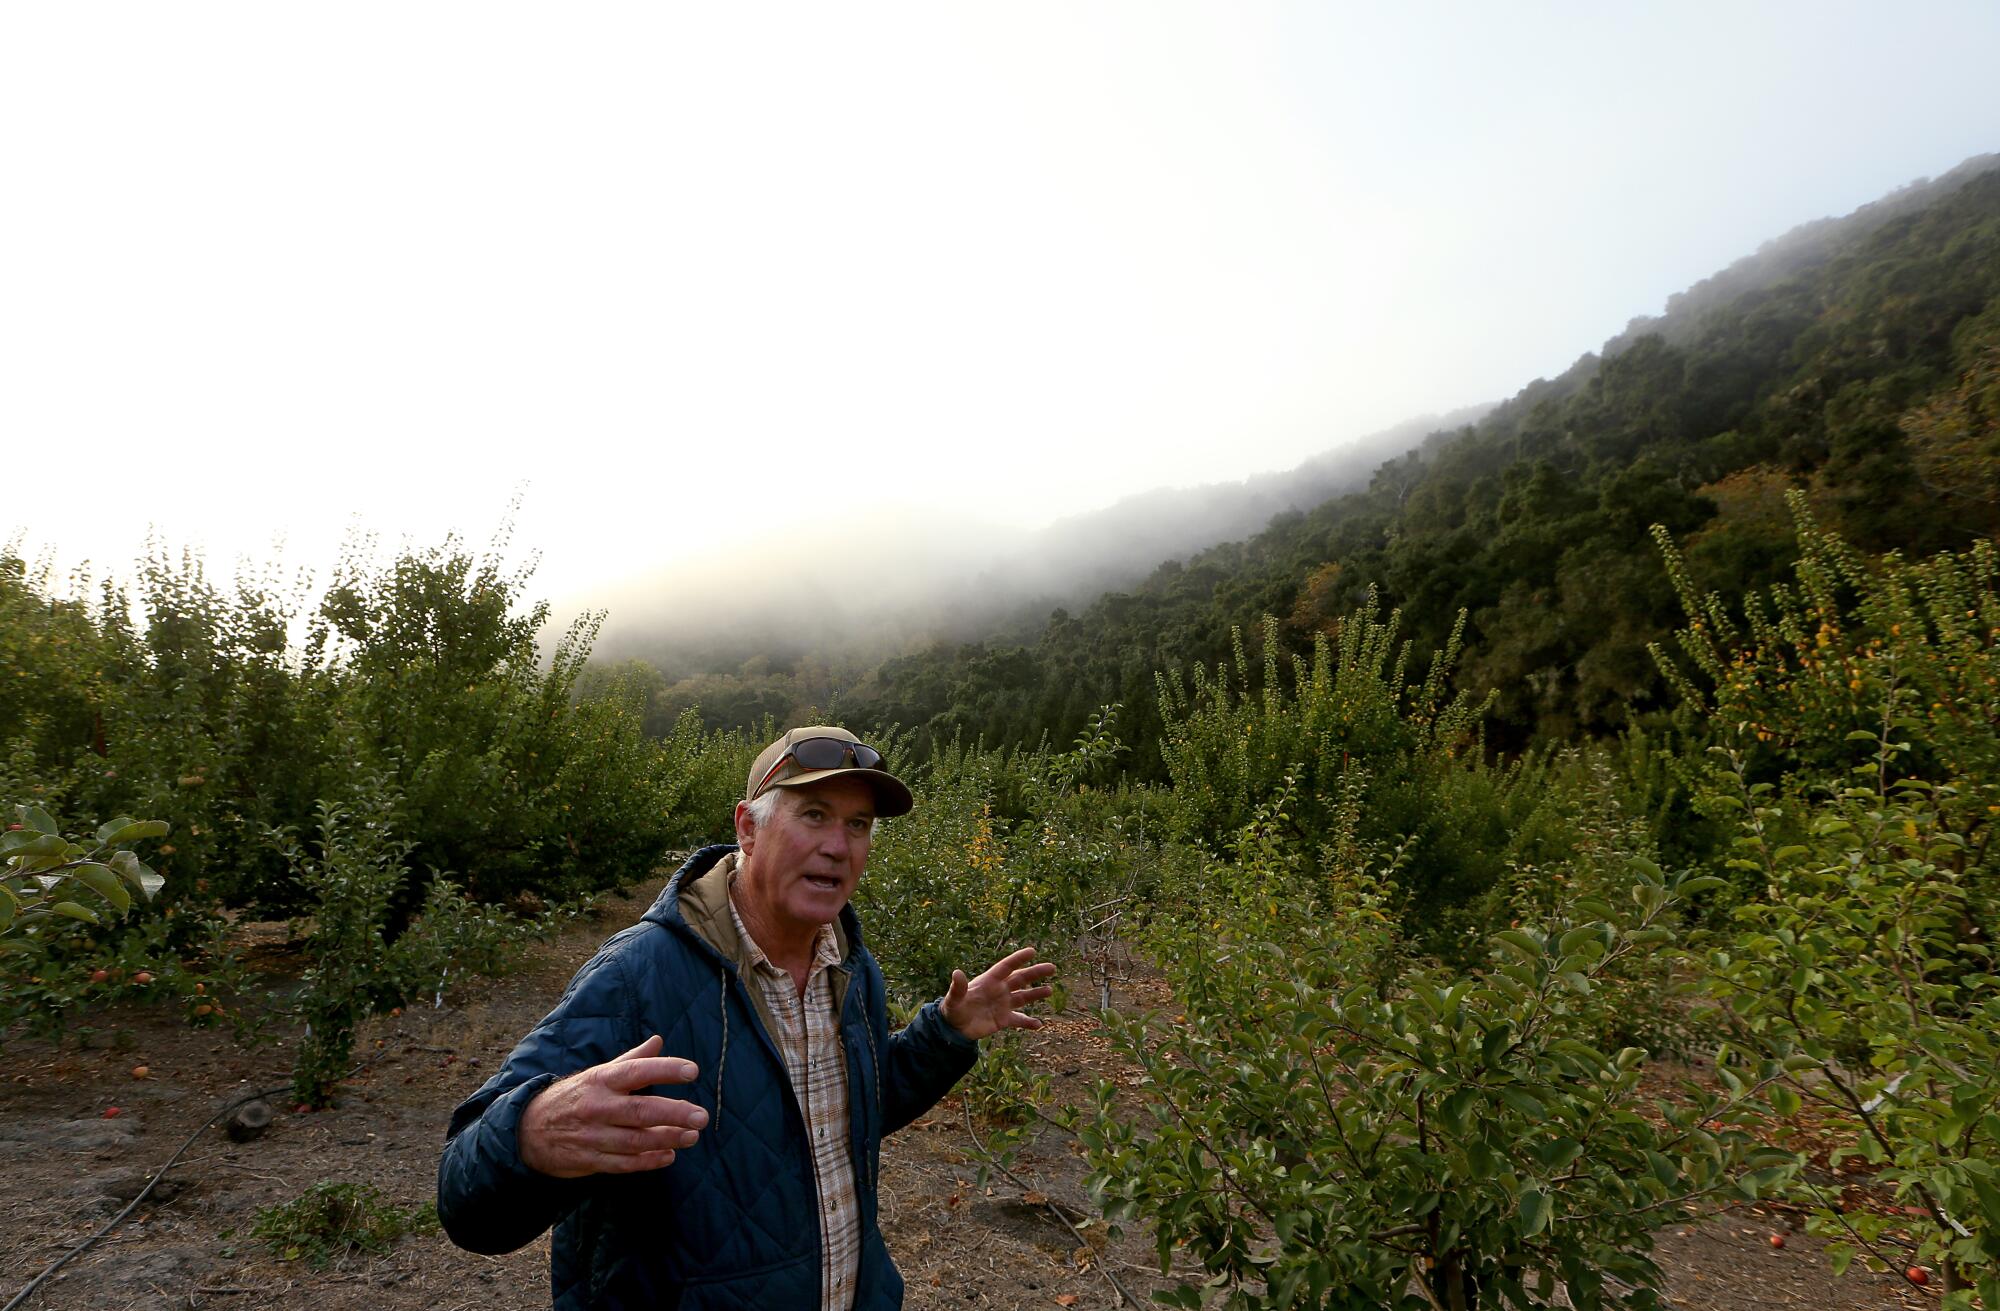 A man stands outdoors and gestures with his hands as a heavy mist hovers behind him. 